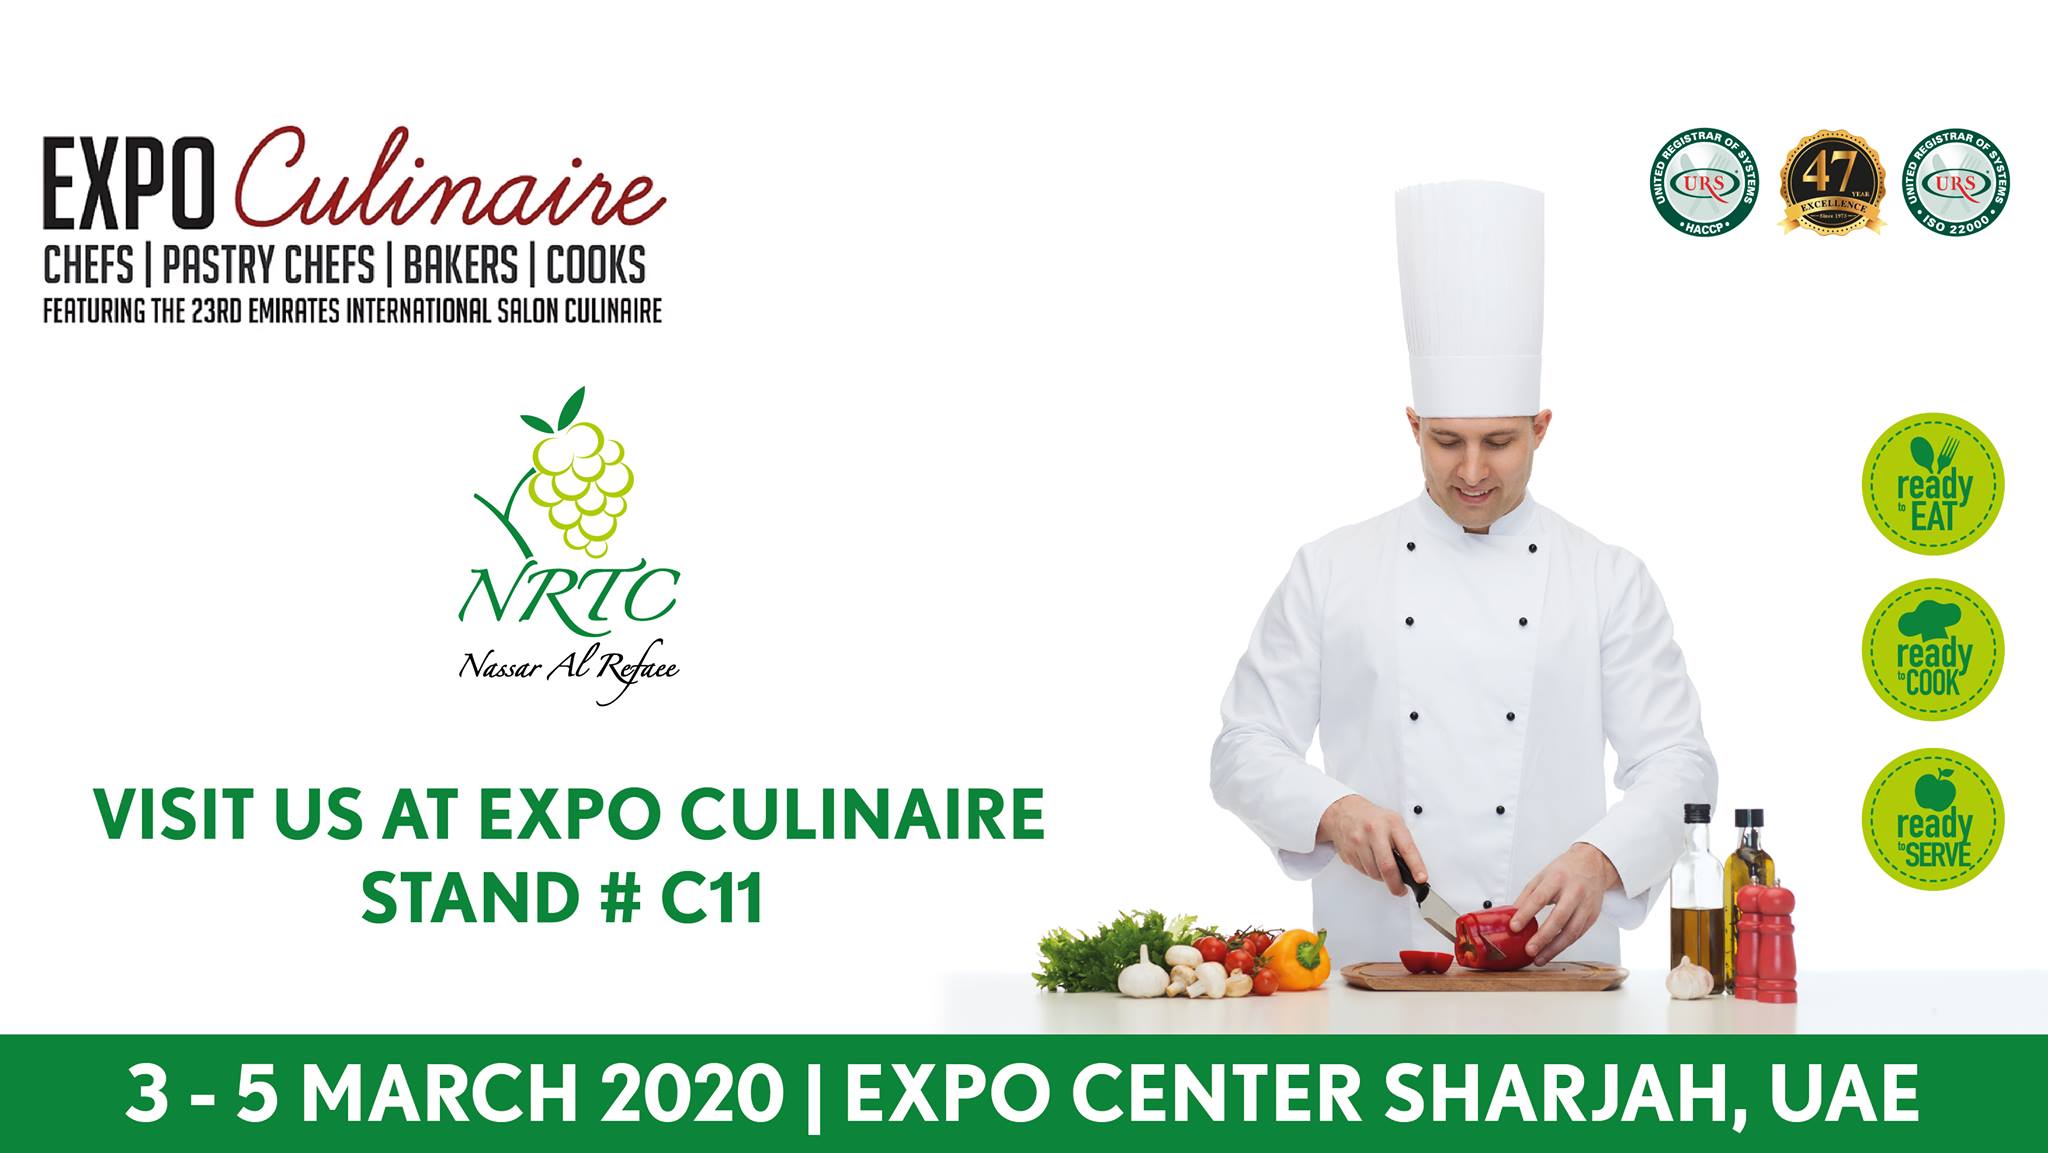 Expo Culinaire 2020